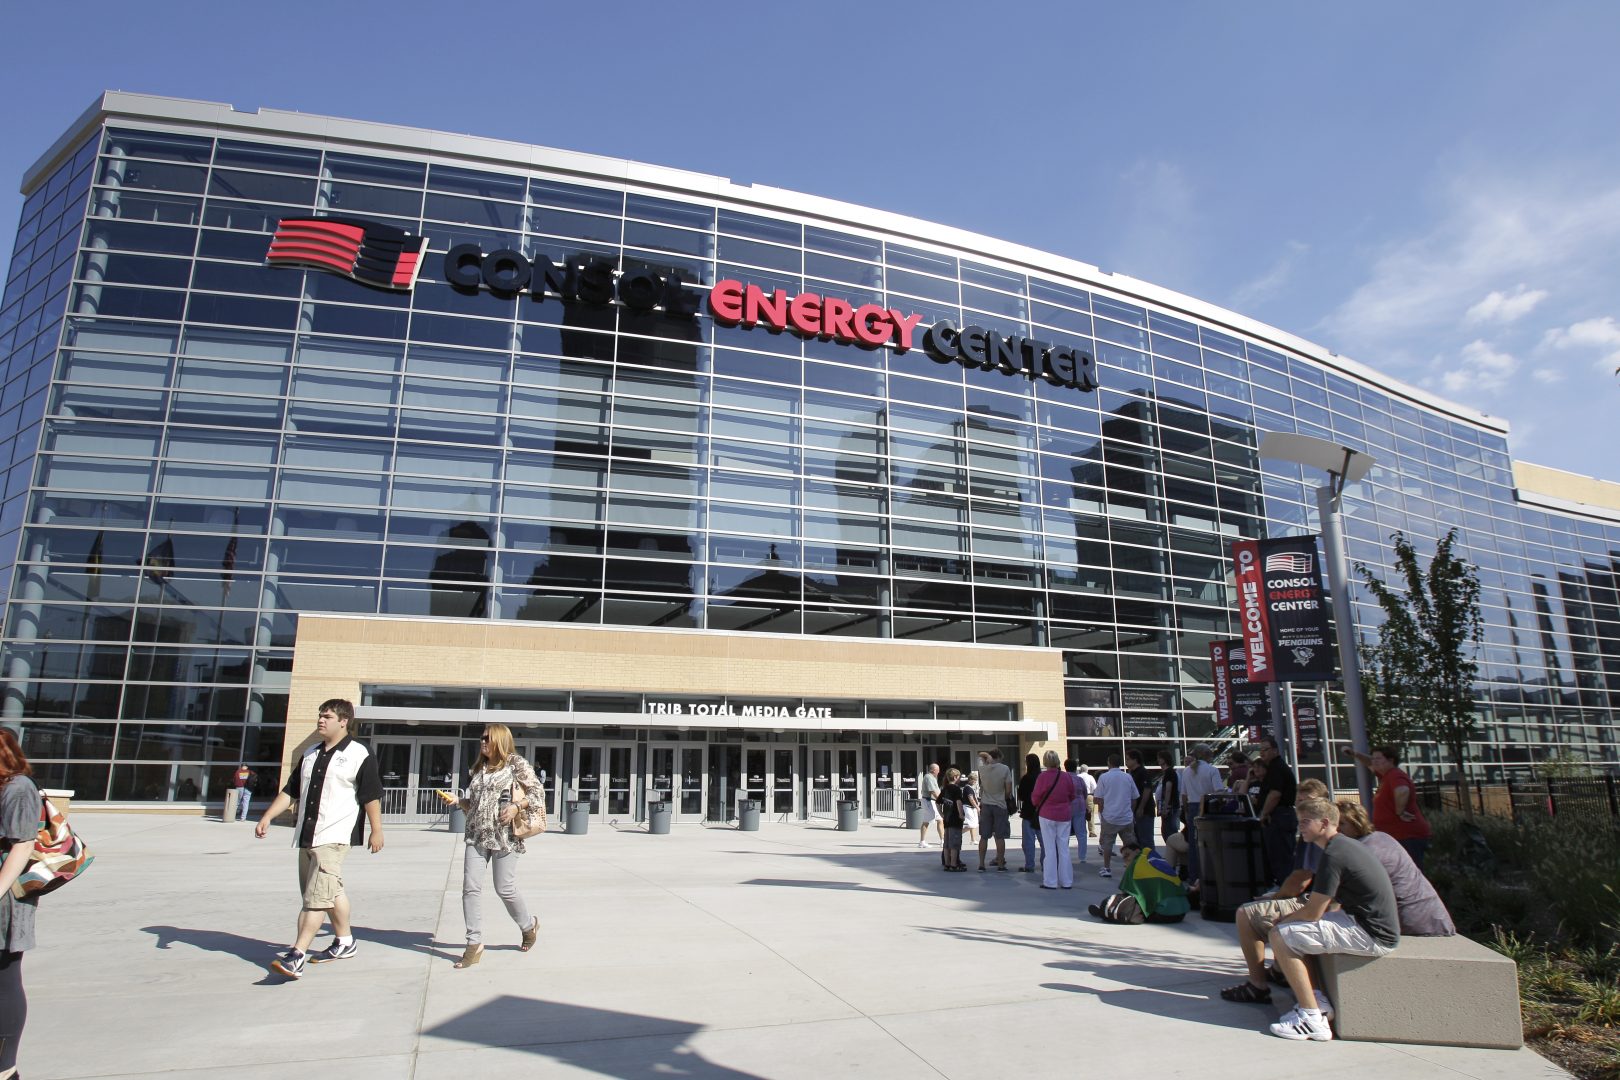 The Consol Energy Center in Pittsburgh will now be called the PPG Paints arena.